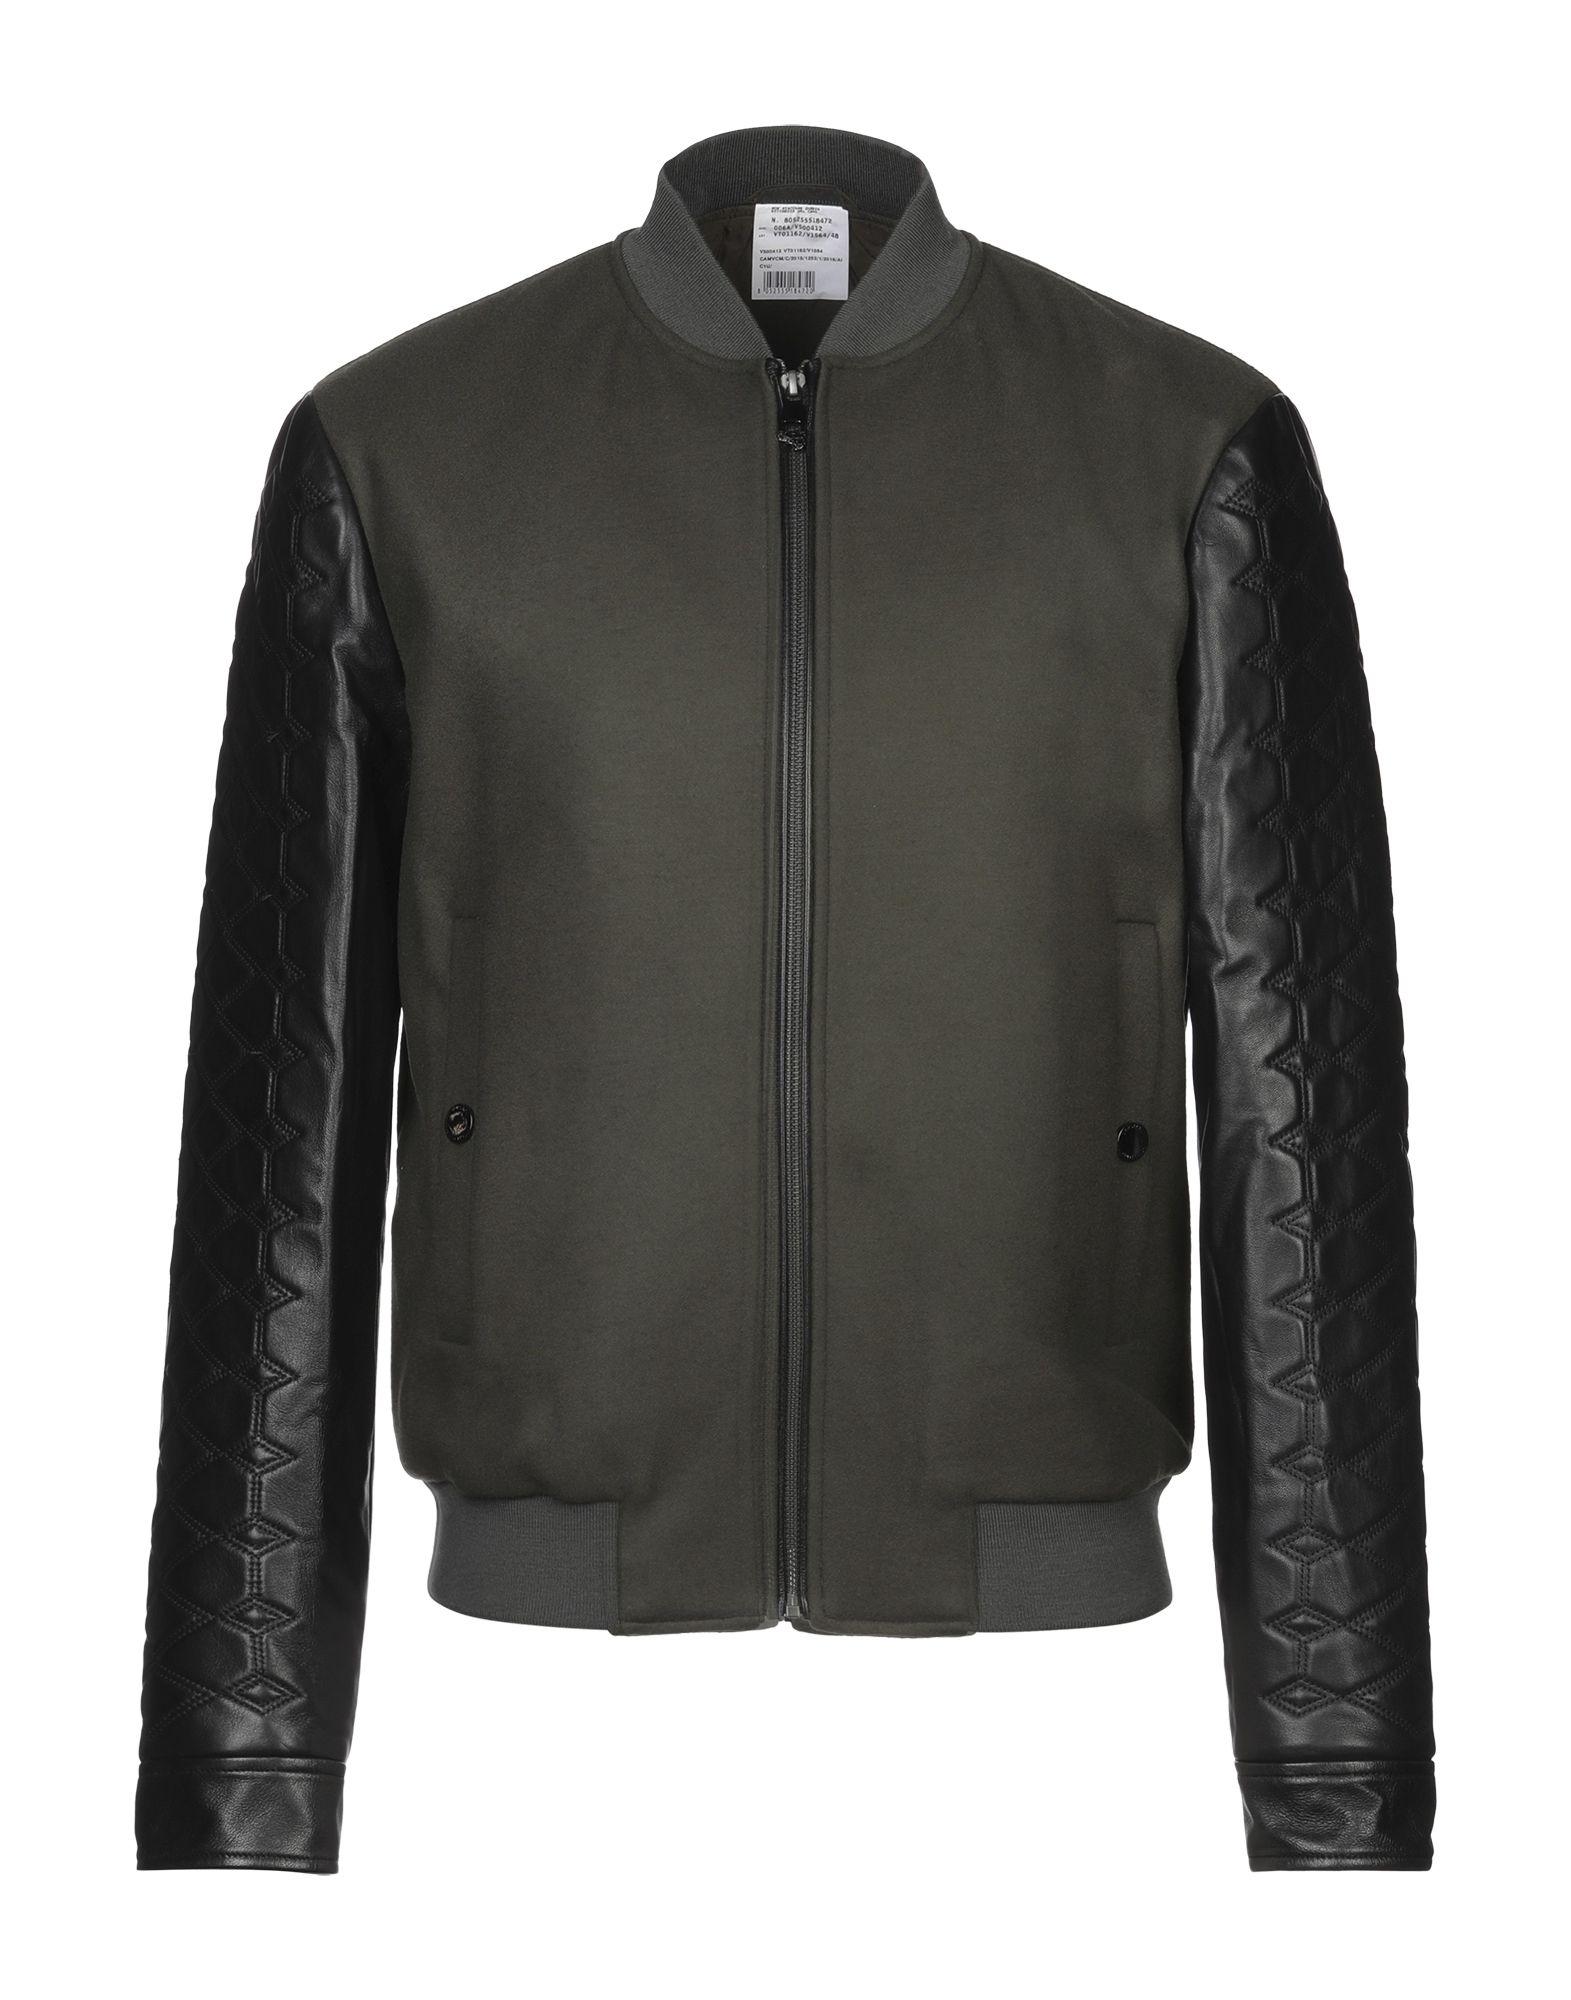 Versace Leather Jacket in Military Green (Green) for Men - Lyst